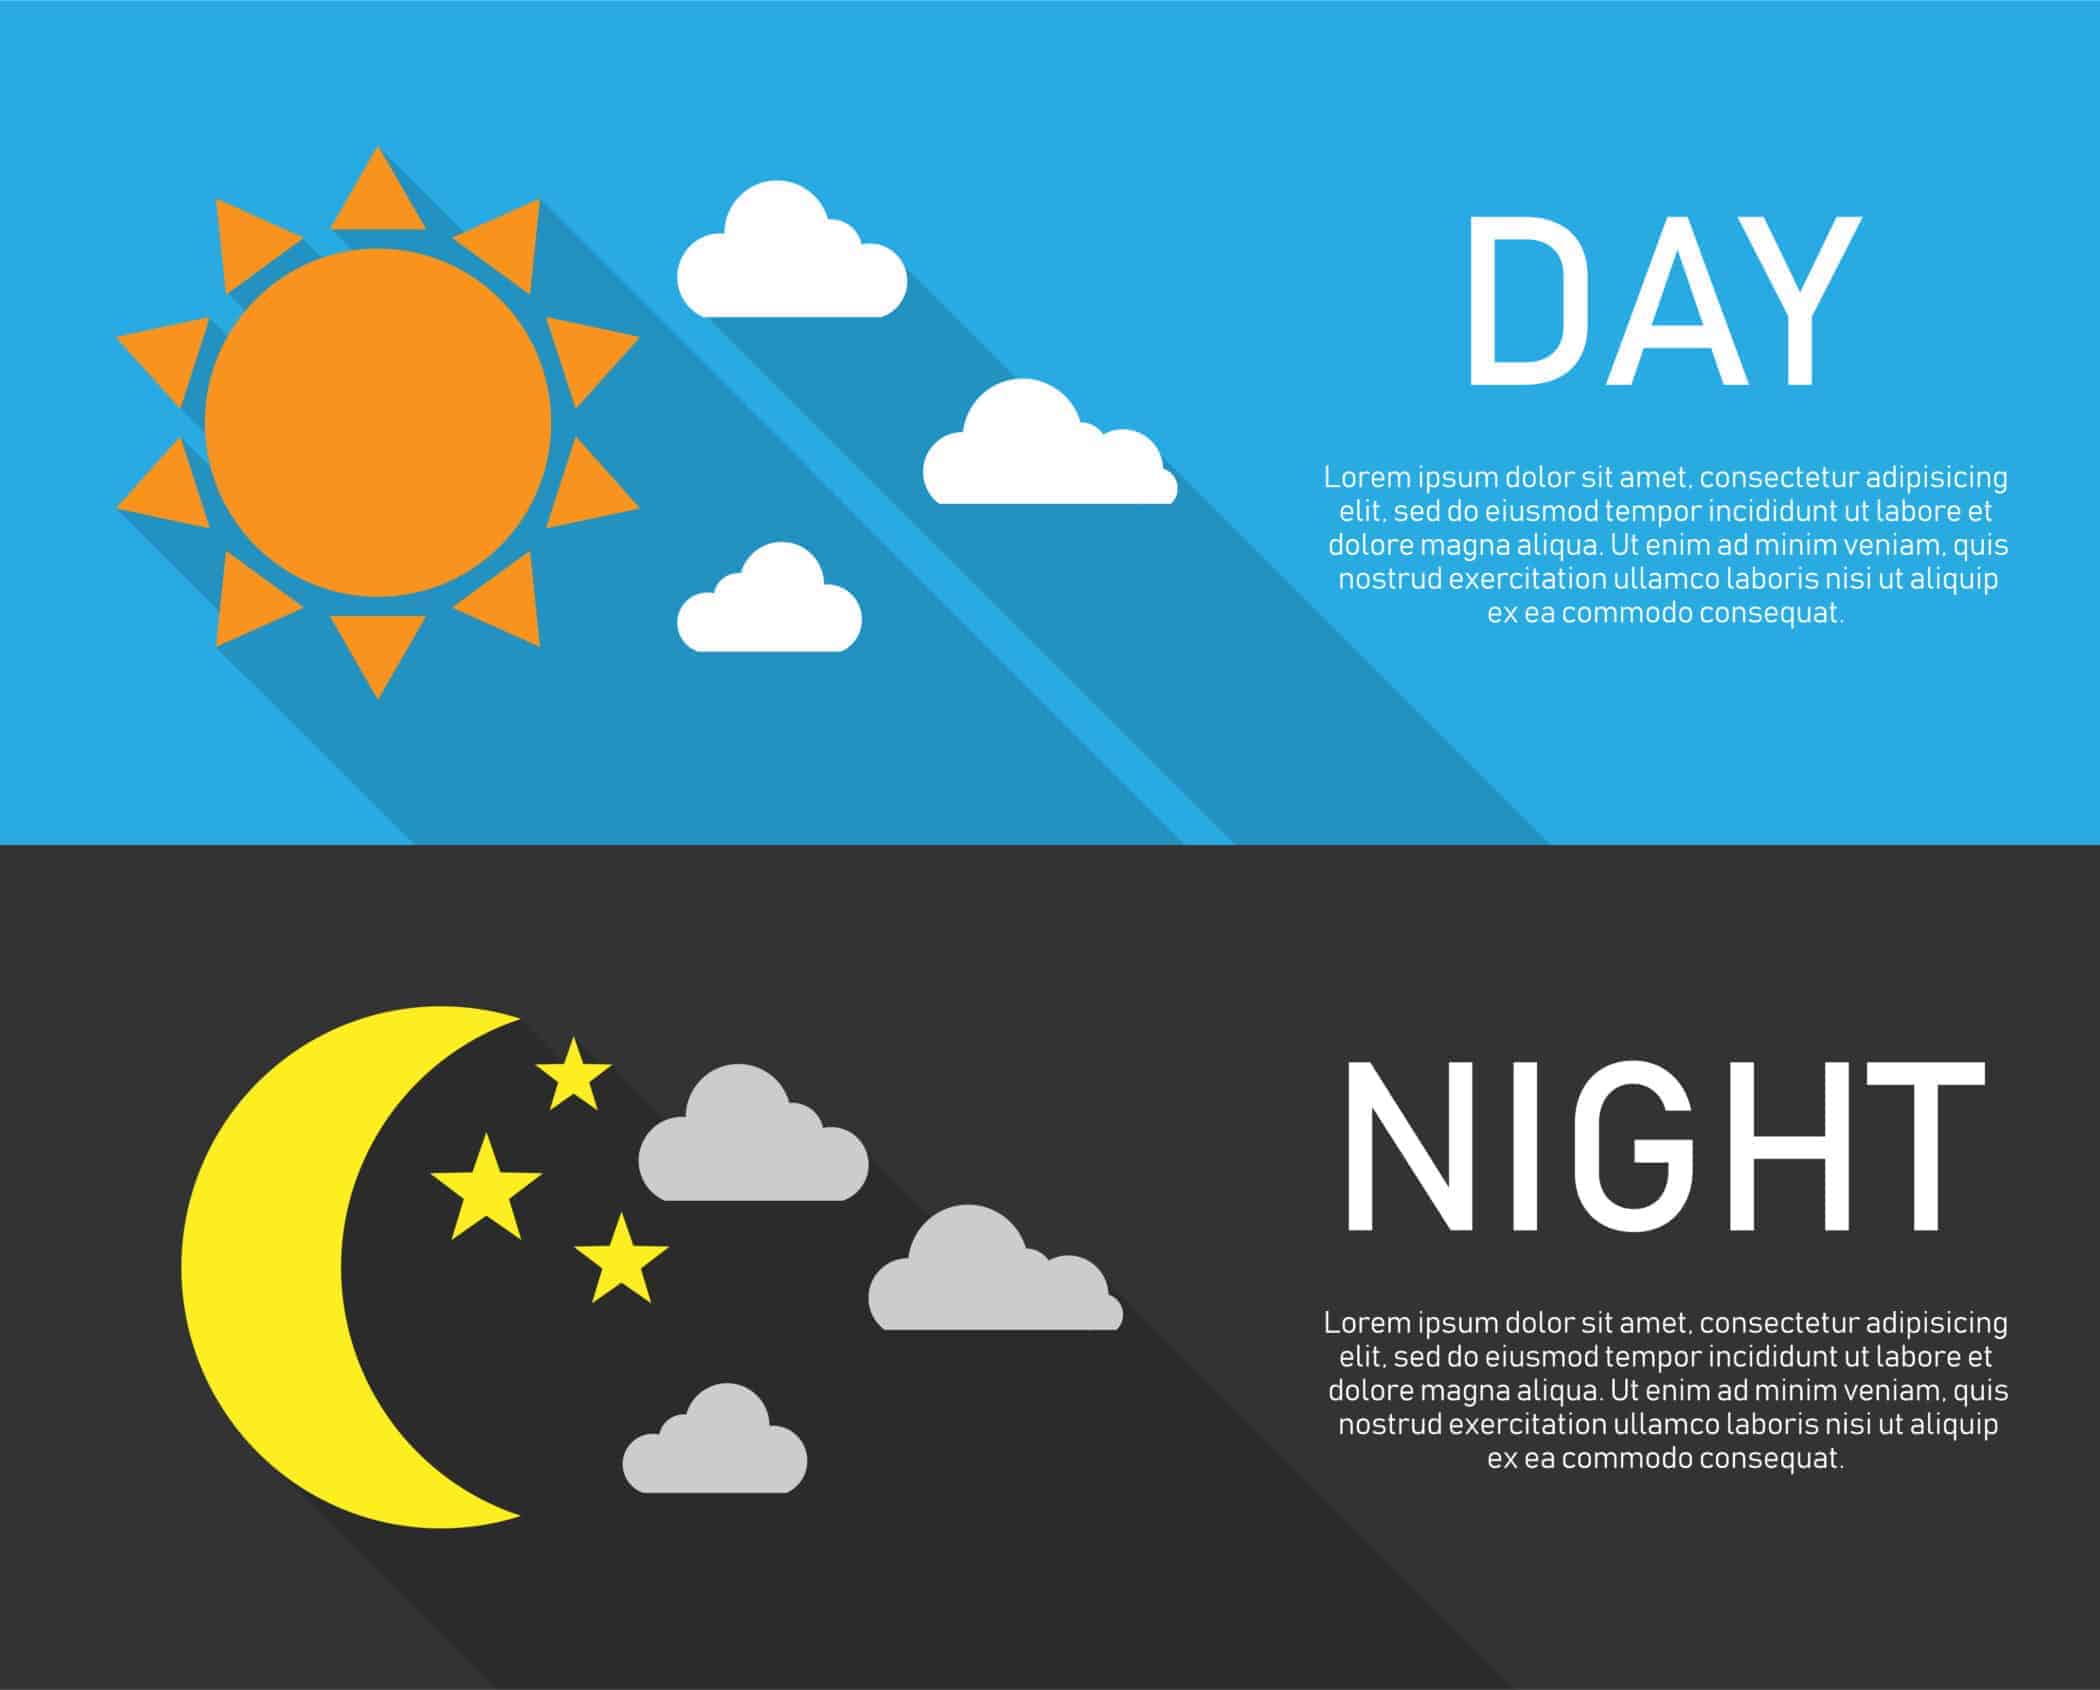 day and night